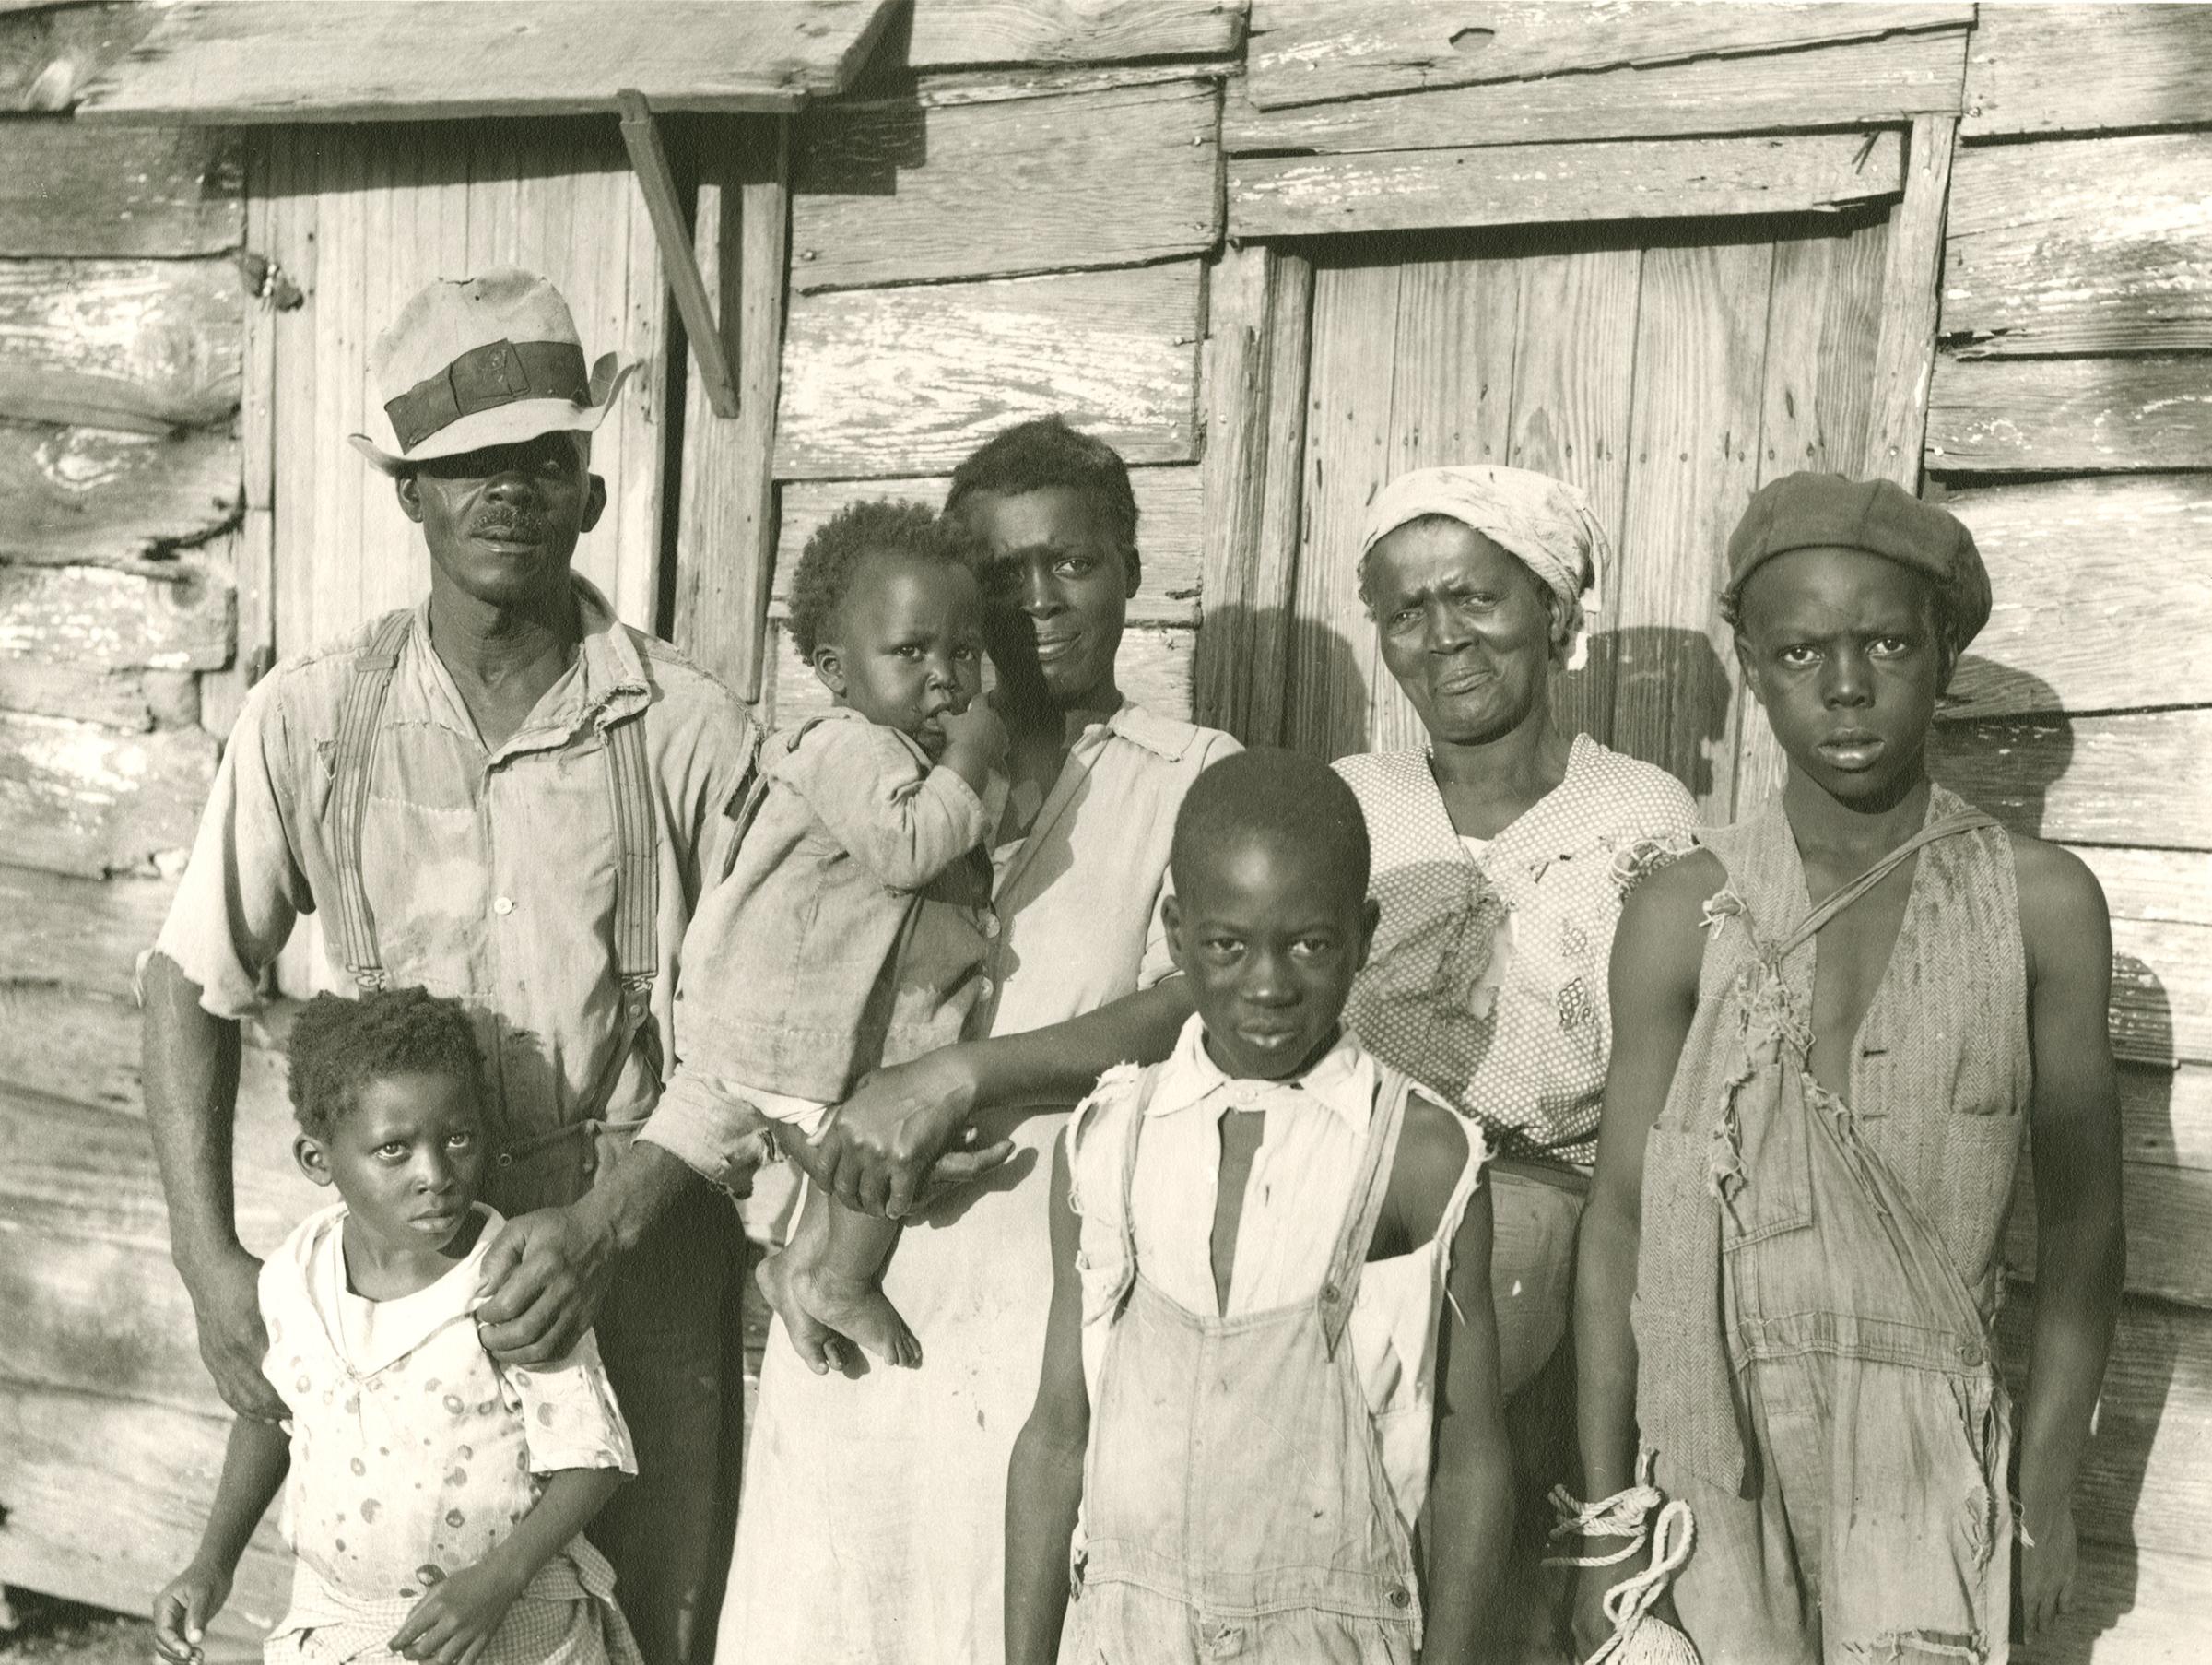 Rehabilitation client and his family on Lady's Sound off Beaufort, SC, 1936.